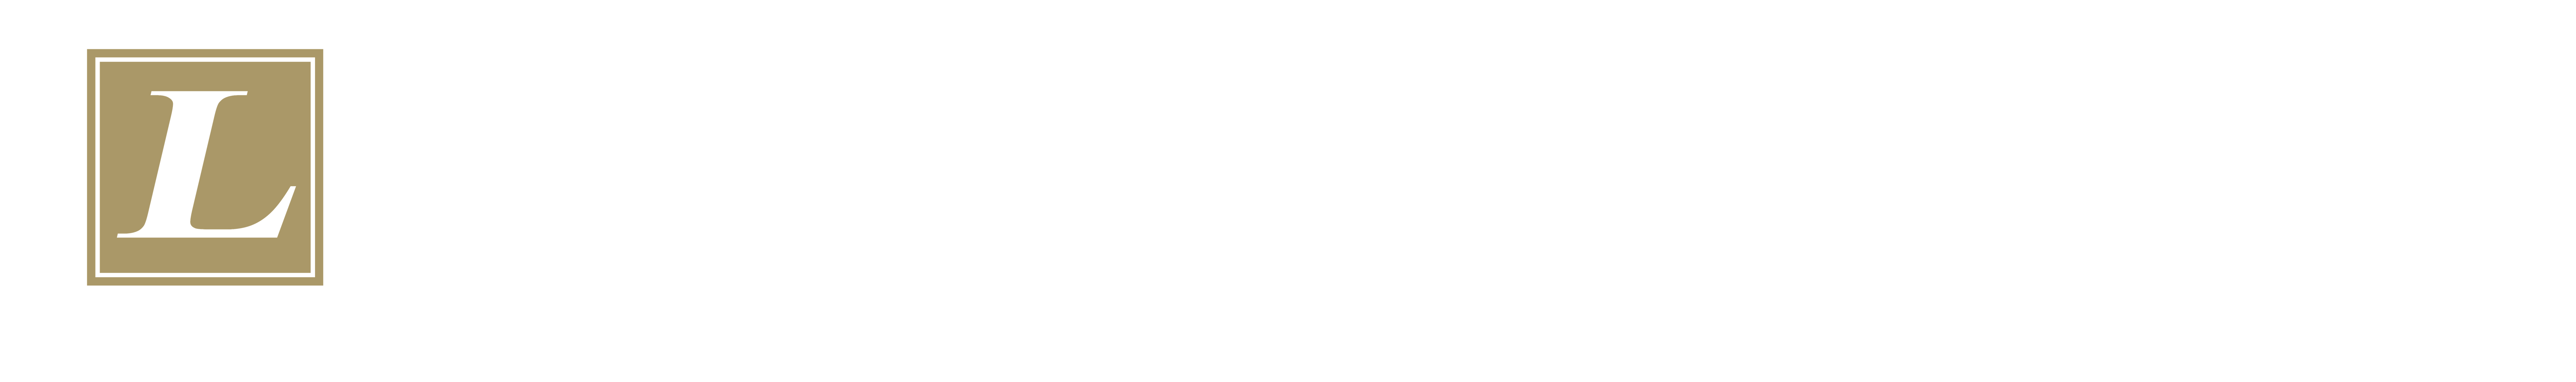 Luxury Collection Real Estate Logo